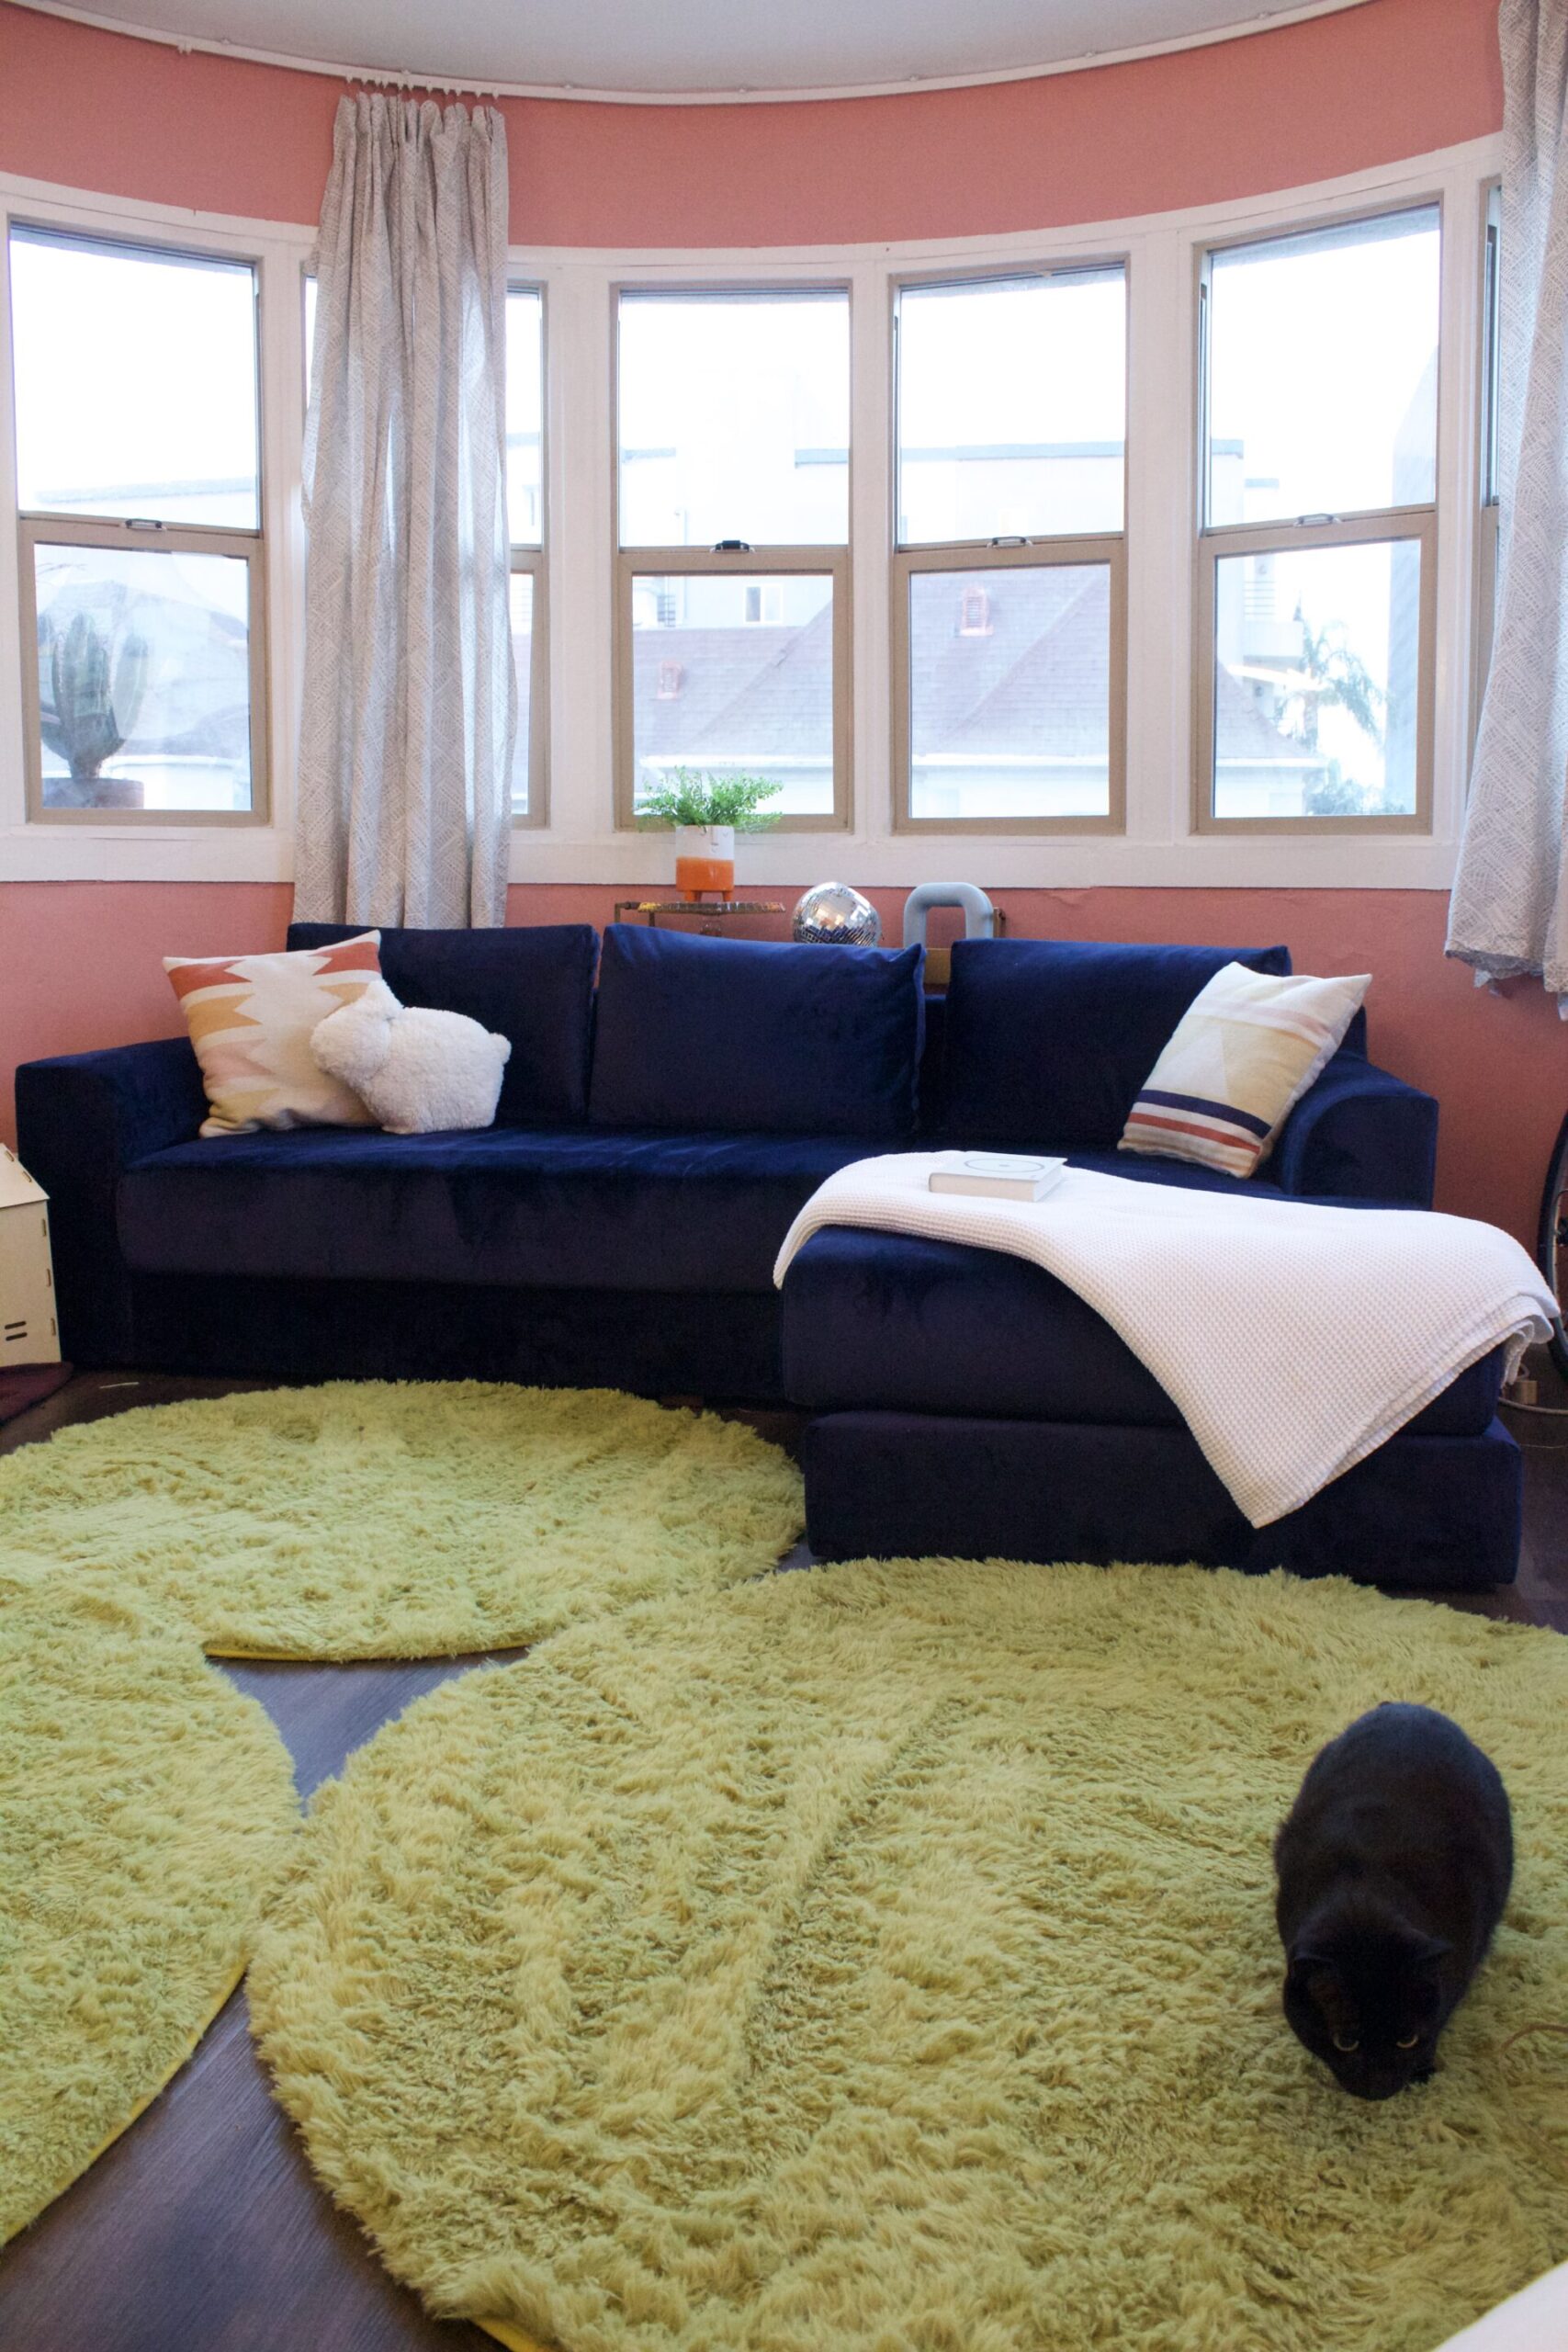 A living room with a navy blue sofa, multiple pillows, and a white blanket. The floor has light green rugs, and a black cat is sitting on one of the rugs near the bottom of the image.